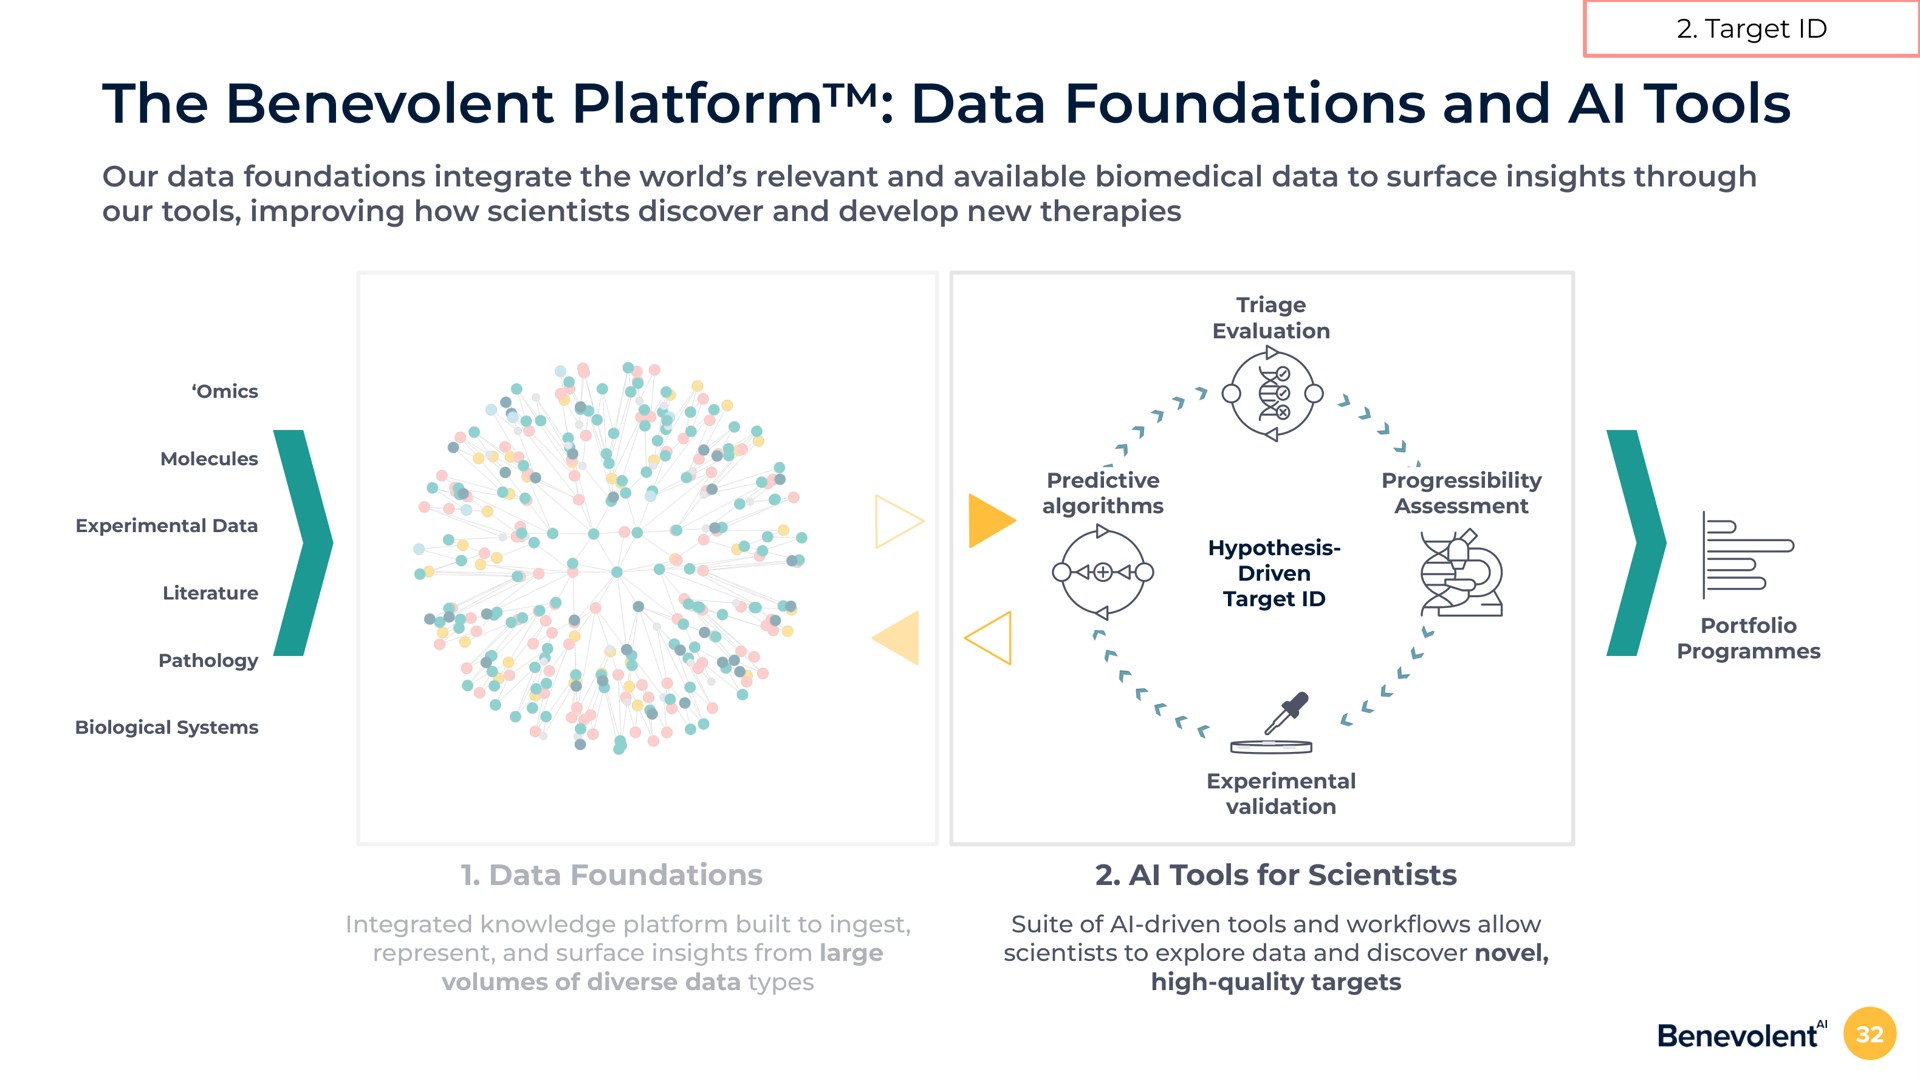 the benevolent platform data foundations and tools our data foundations integrate the world relevant and available data to surface insights through our tools improving how scientists discover and develop new therapies target data foundations tools for scientists | BenevolentAI